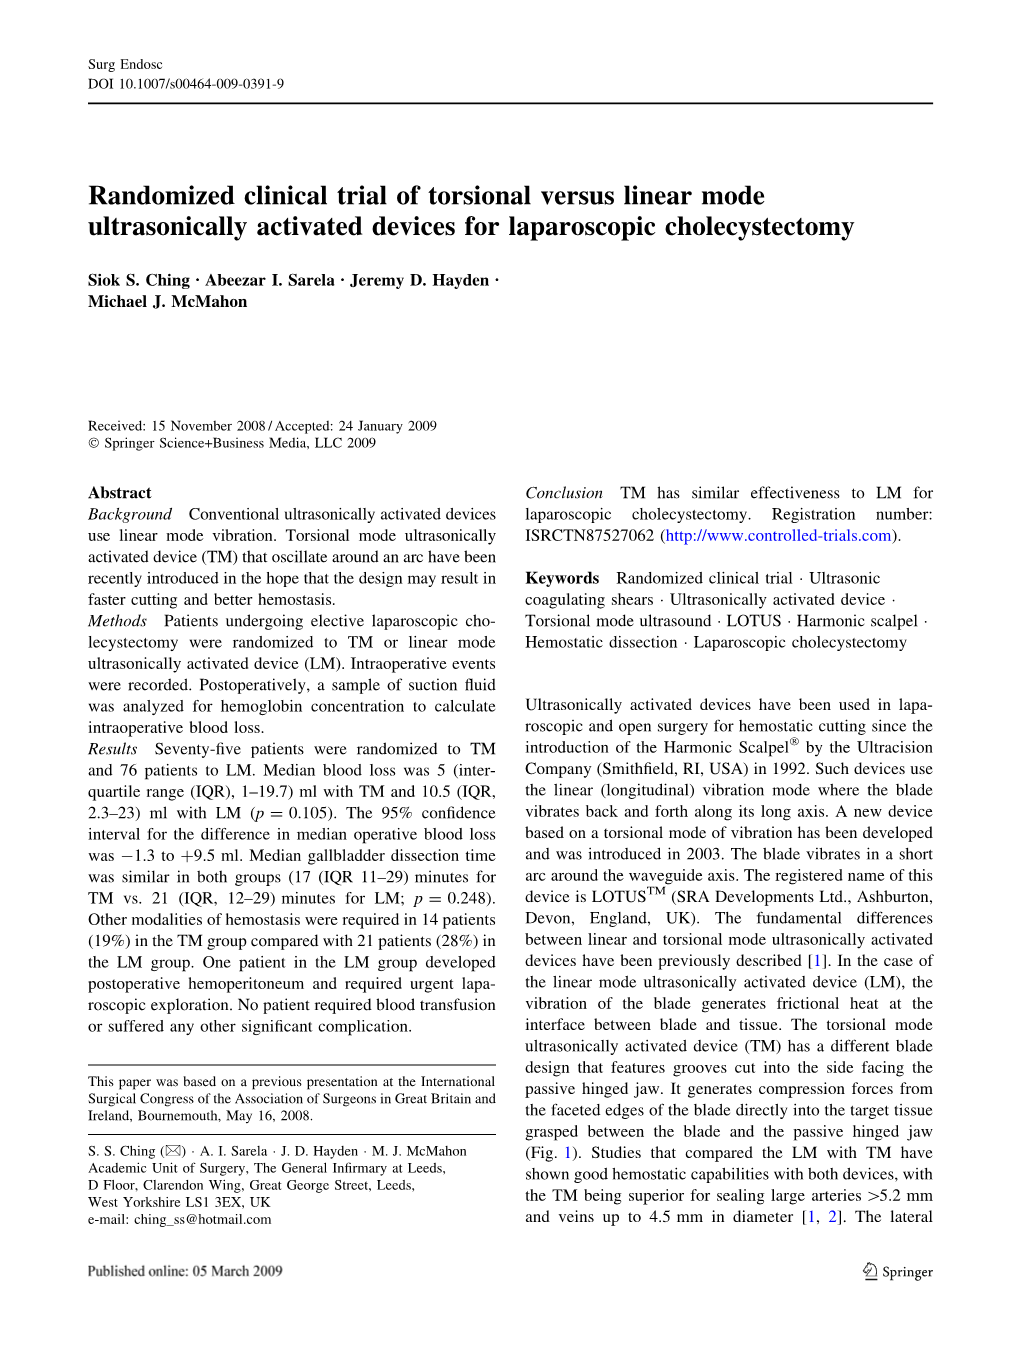 Randomized Clinical Trial of Torsional Versus Linear Mode Ultrasonically Activated Devices for Laparoscopic Cholecystectomy